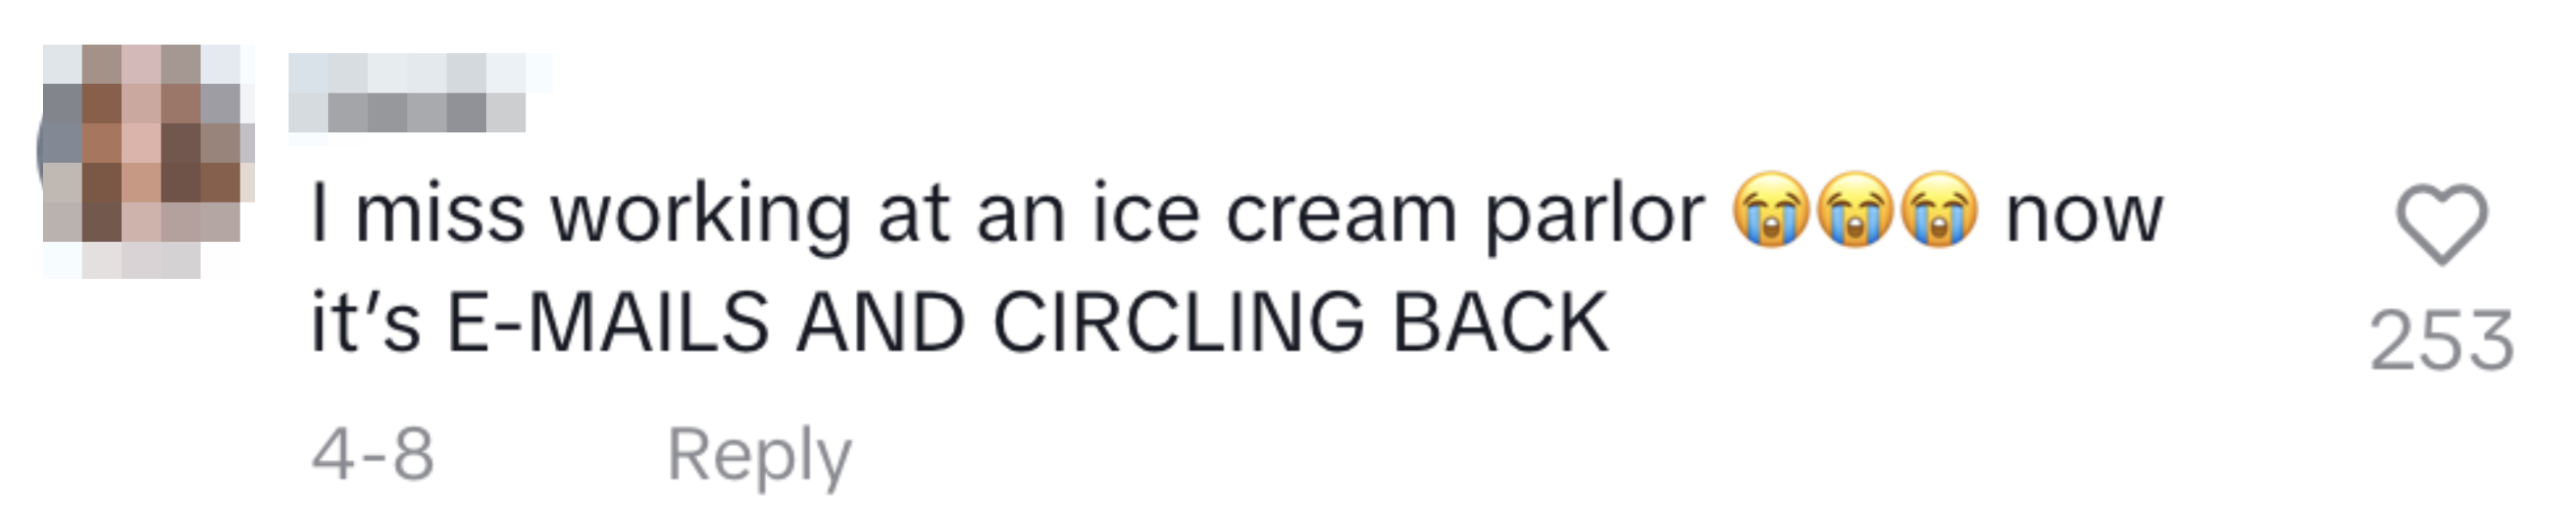 User expresses missing work at an ice cream parlor, contrasts it humorously with current office work